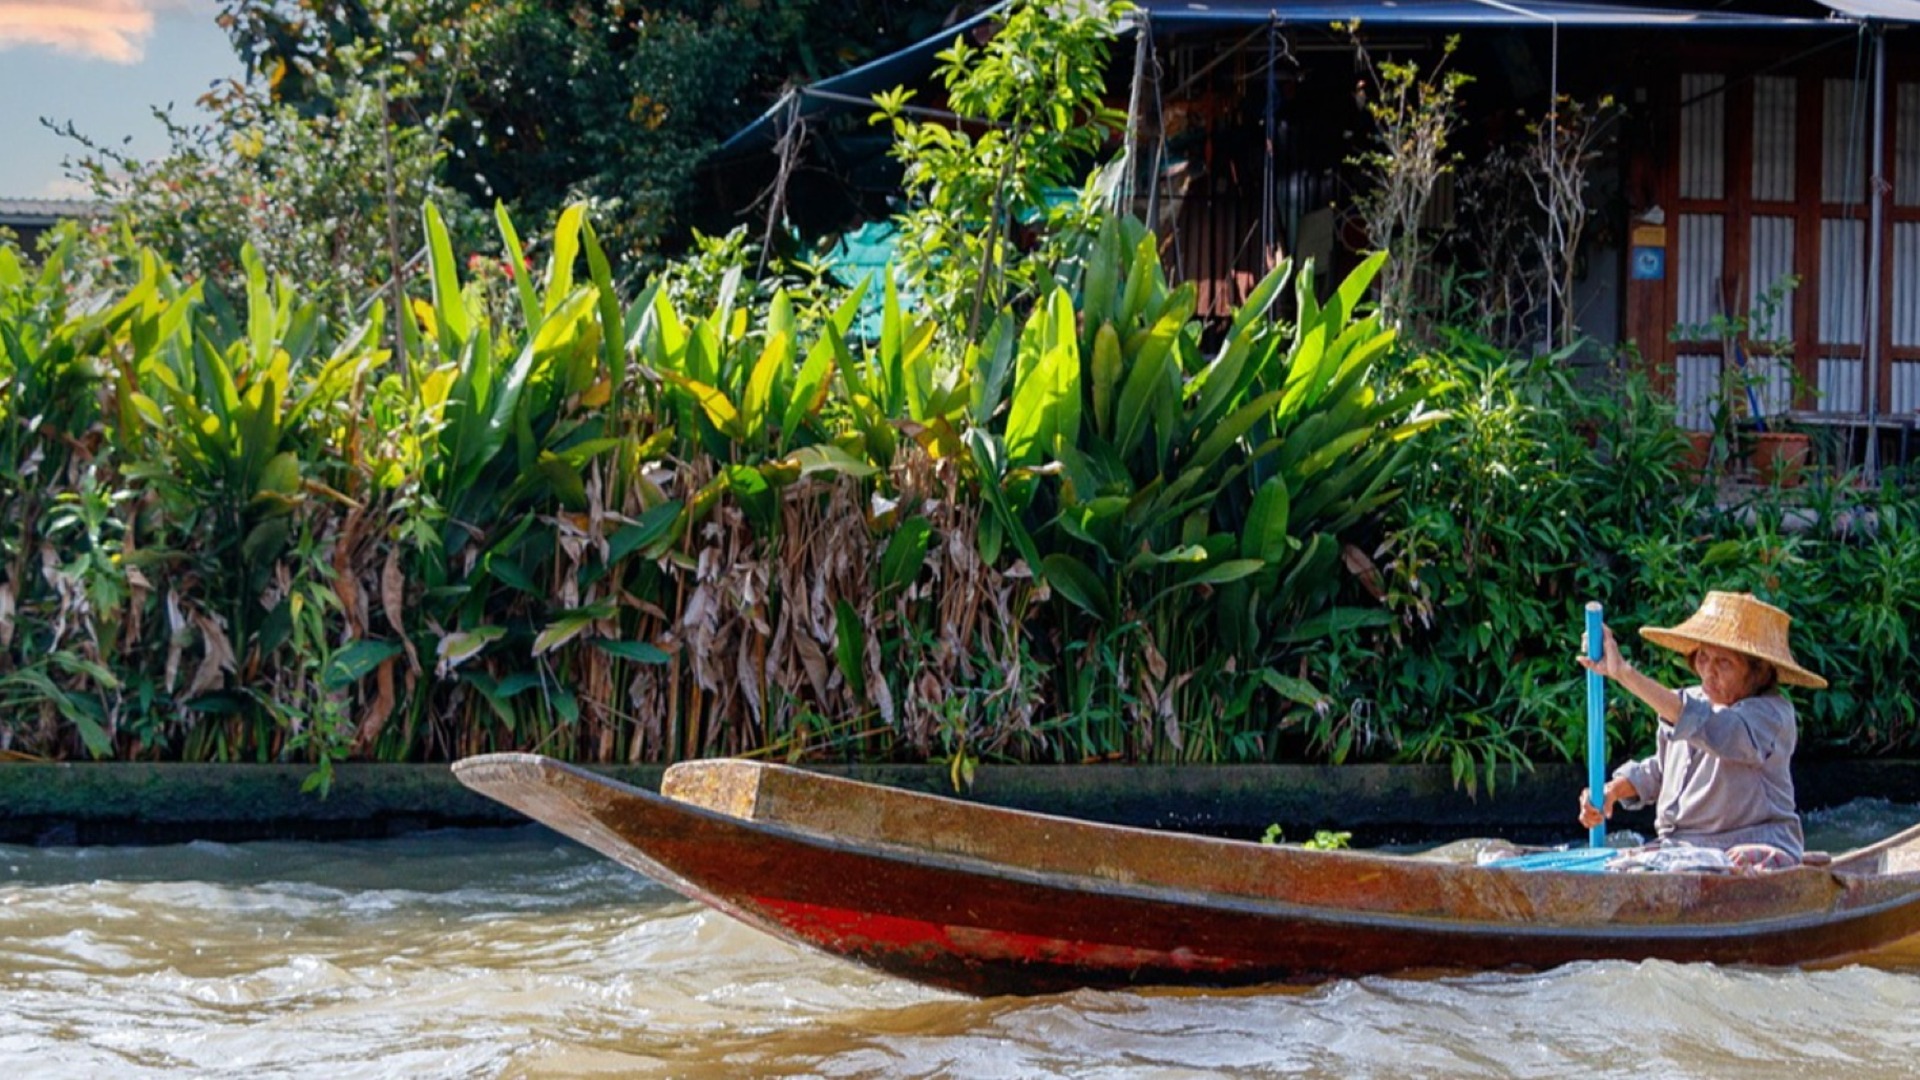 Thailandia Tour del Nord,  Bangkok & Relax in Isole - Upandround